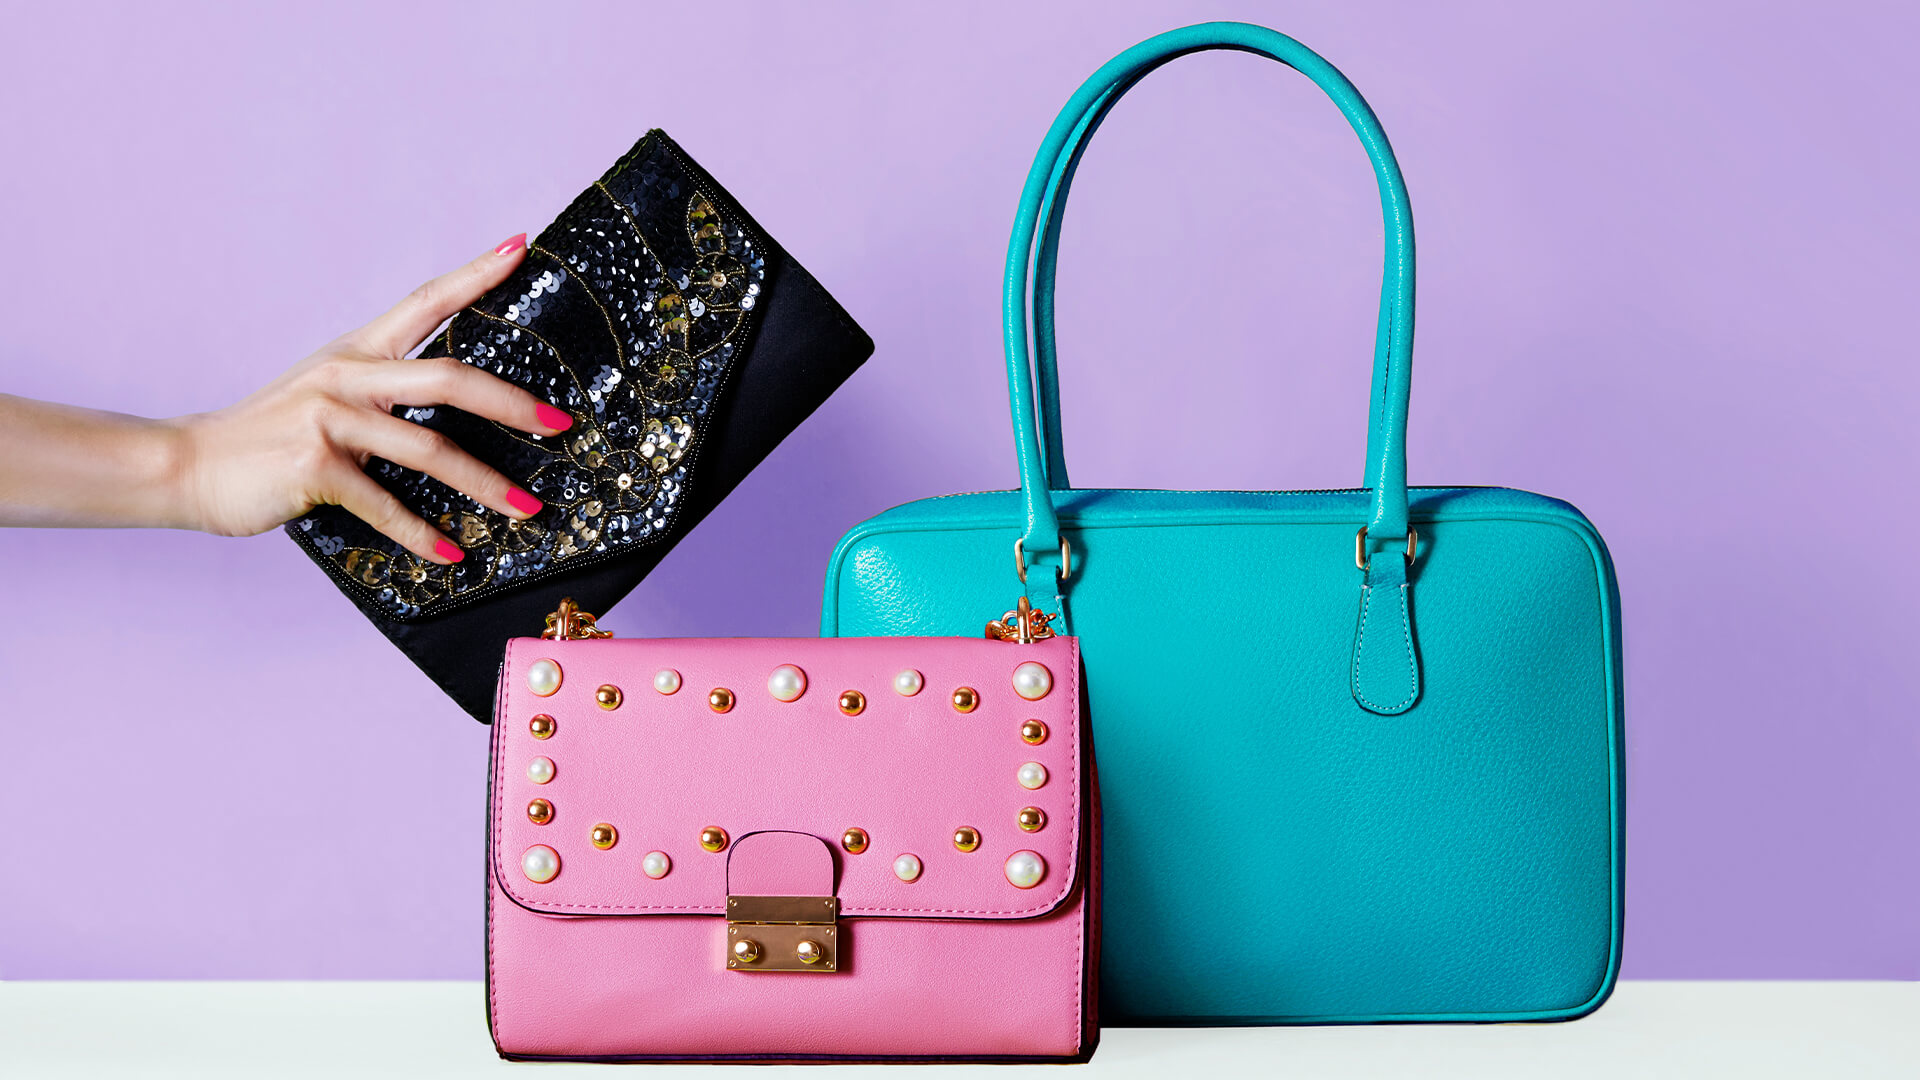 Three luxury bags against a lilac background. One is a larger turquois pocketbook, one is a bubblegum pink shoulder bag with pearl details, and the third is a patent black clutch